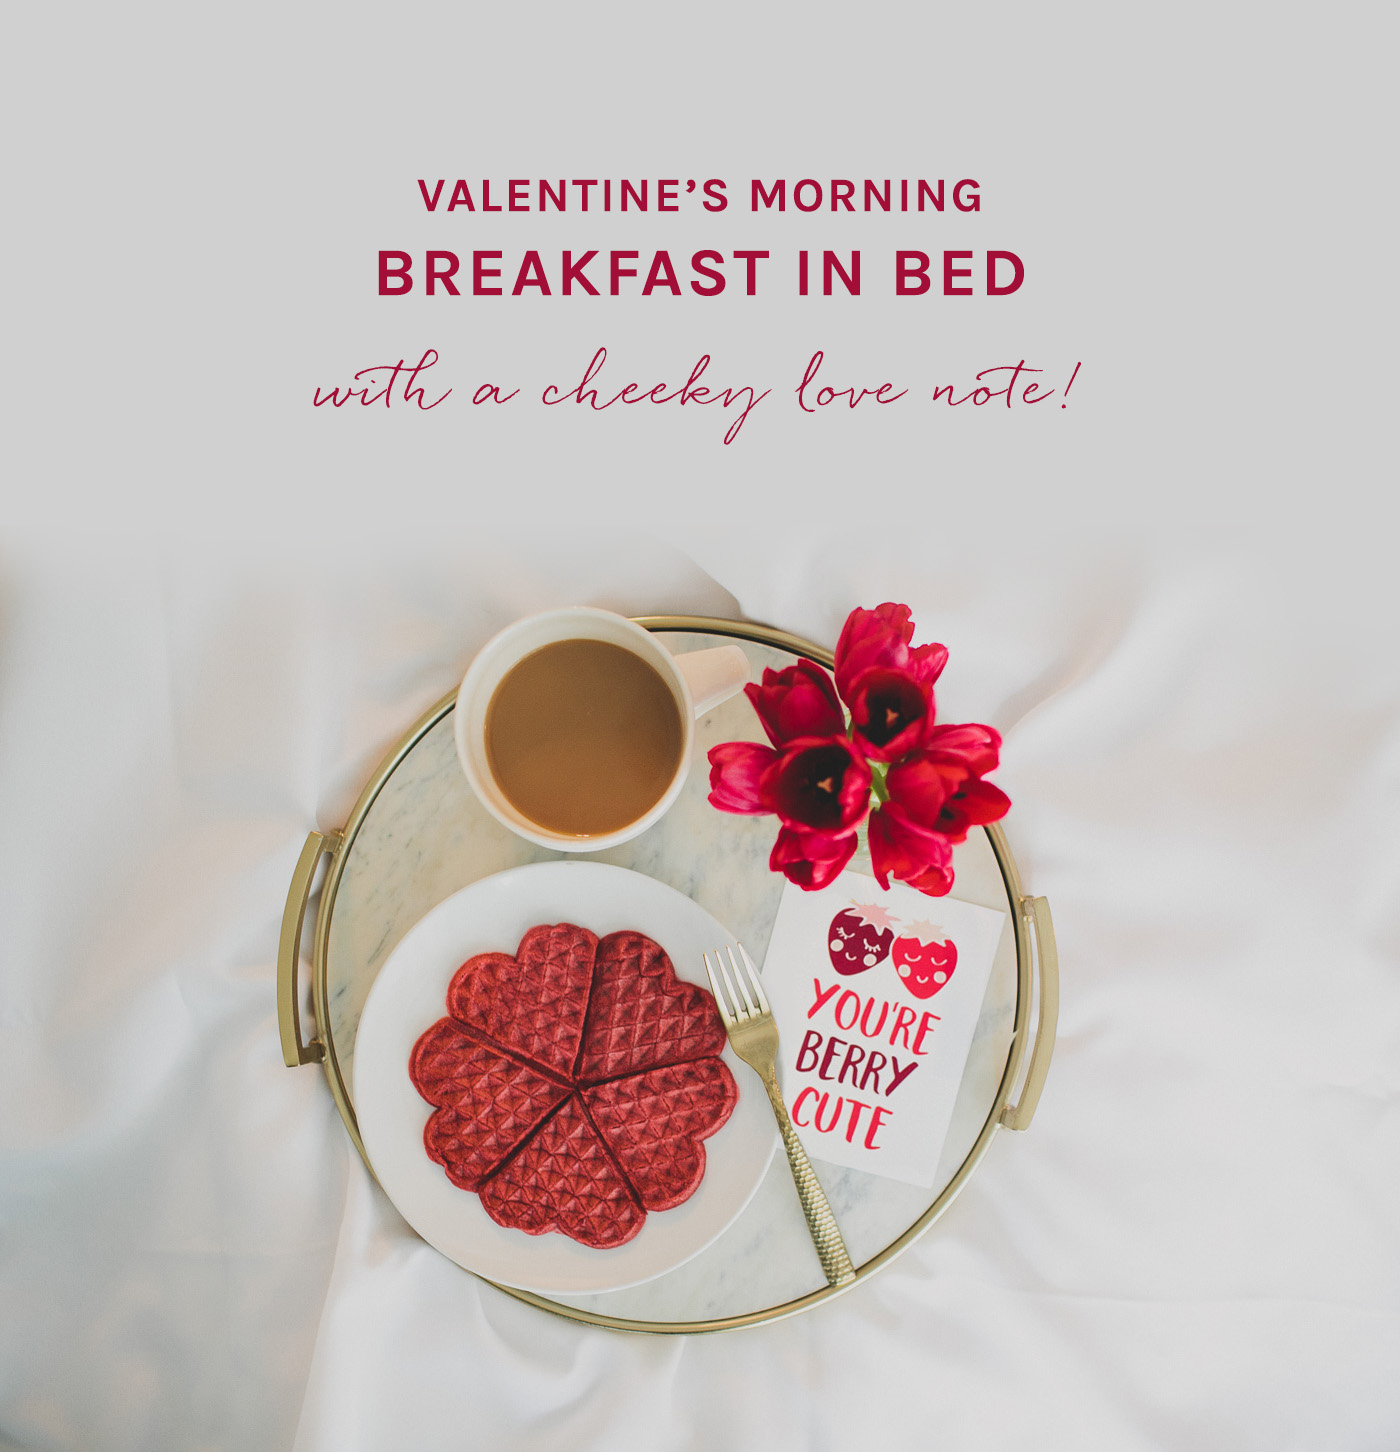 Valentine's Morning Breakfast in Bed with a cheeky love note!